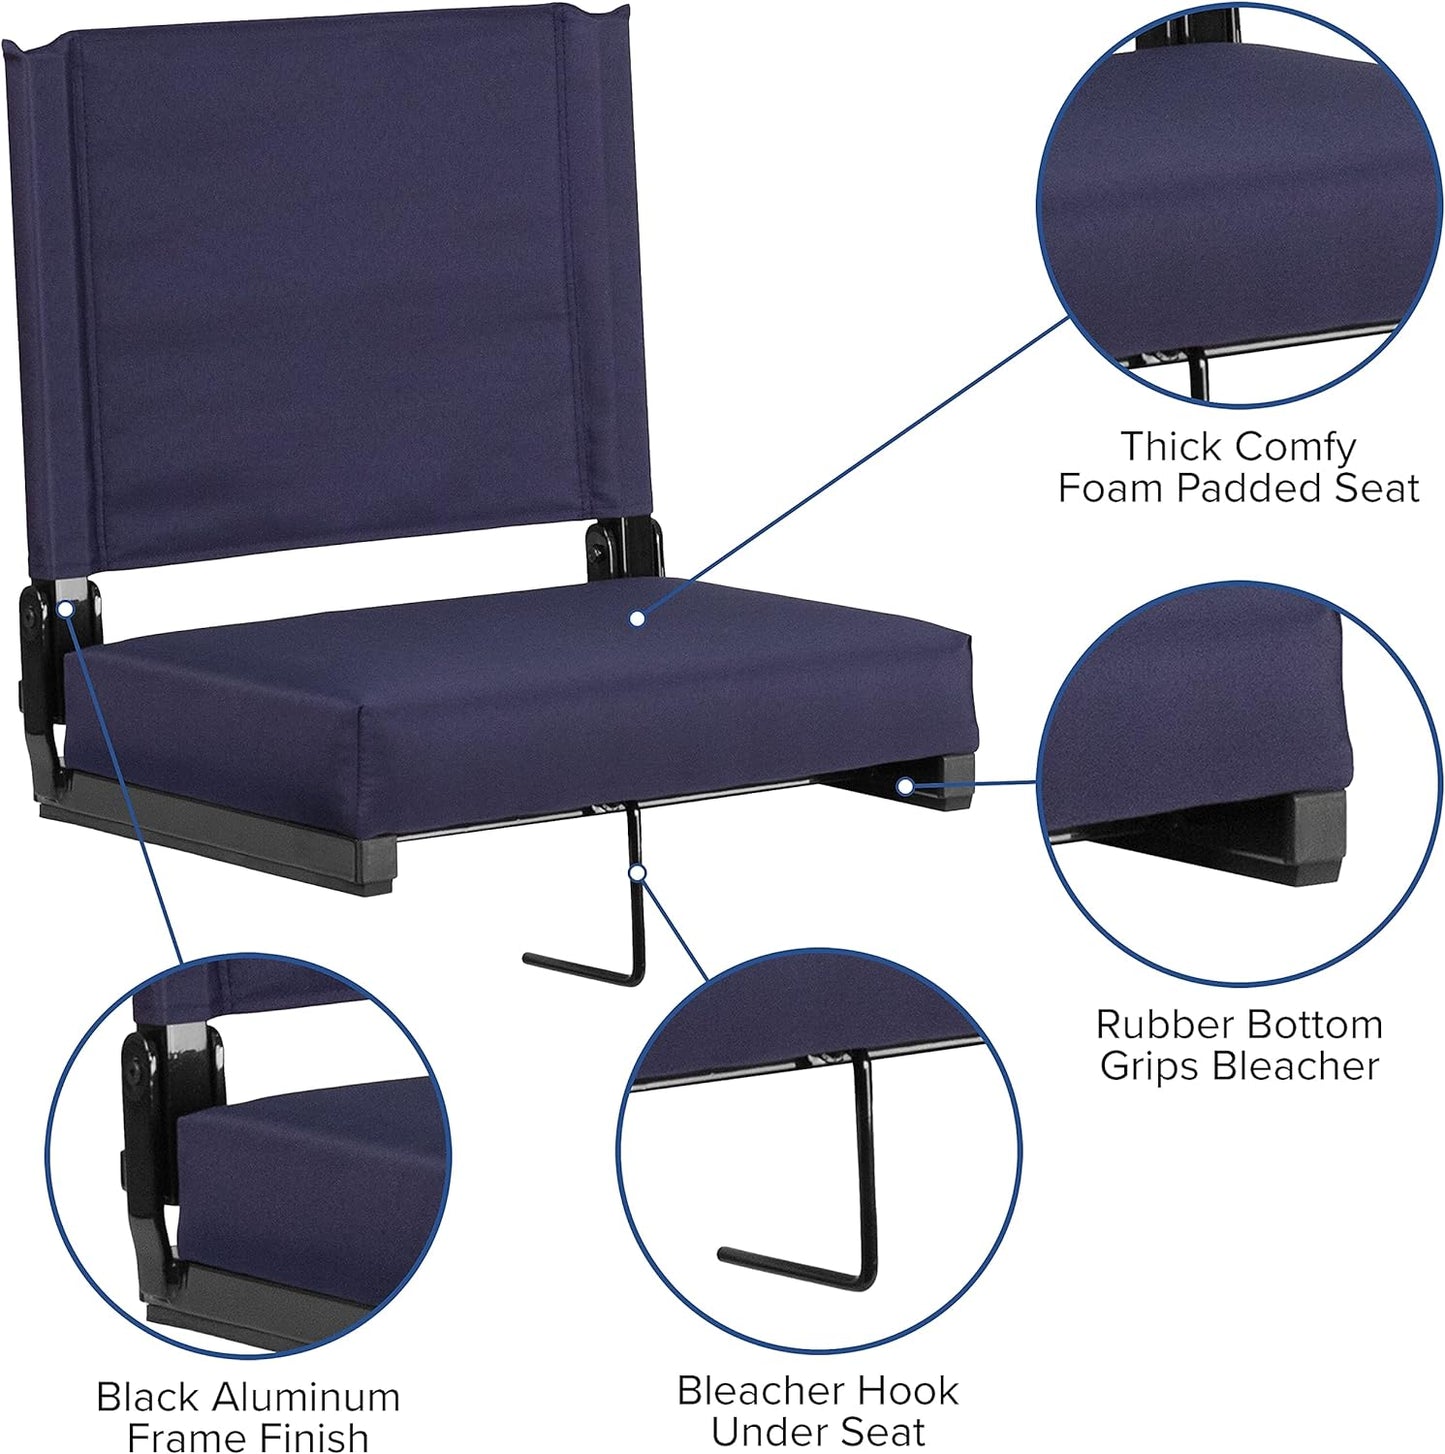 Grandstand Comfort Seats by Flash with Ultra-Padded Seat - Dark Purple, set of two